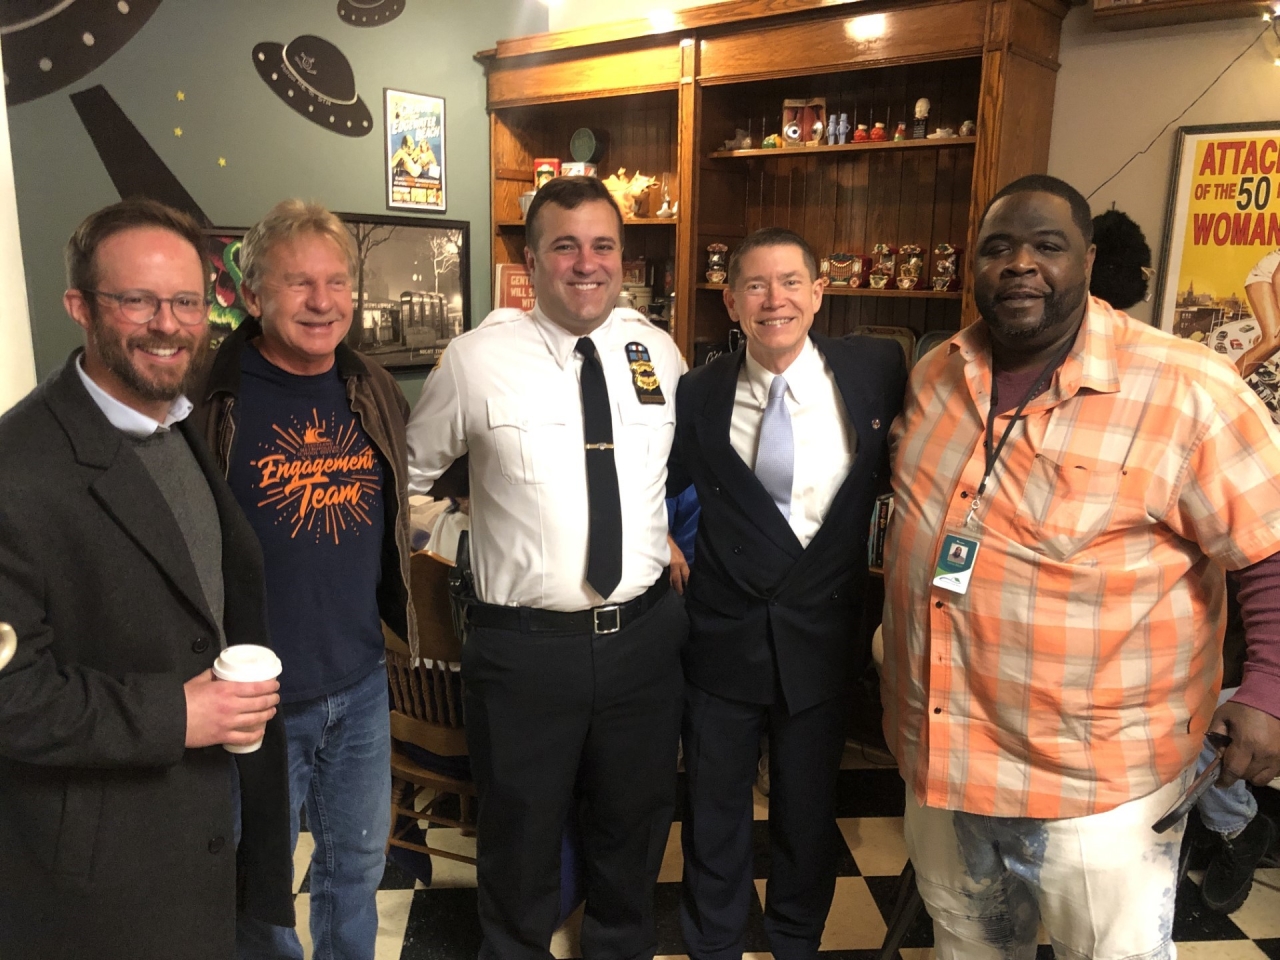 Rep. Brennan attending Coffee with a Cop in Cleveland's ward 17 with Councilmen Charles Slife and Danny Kelly.